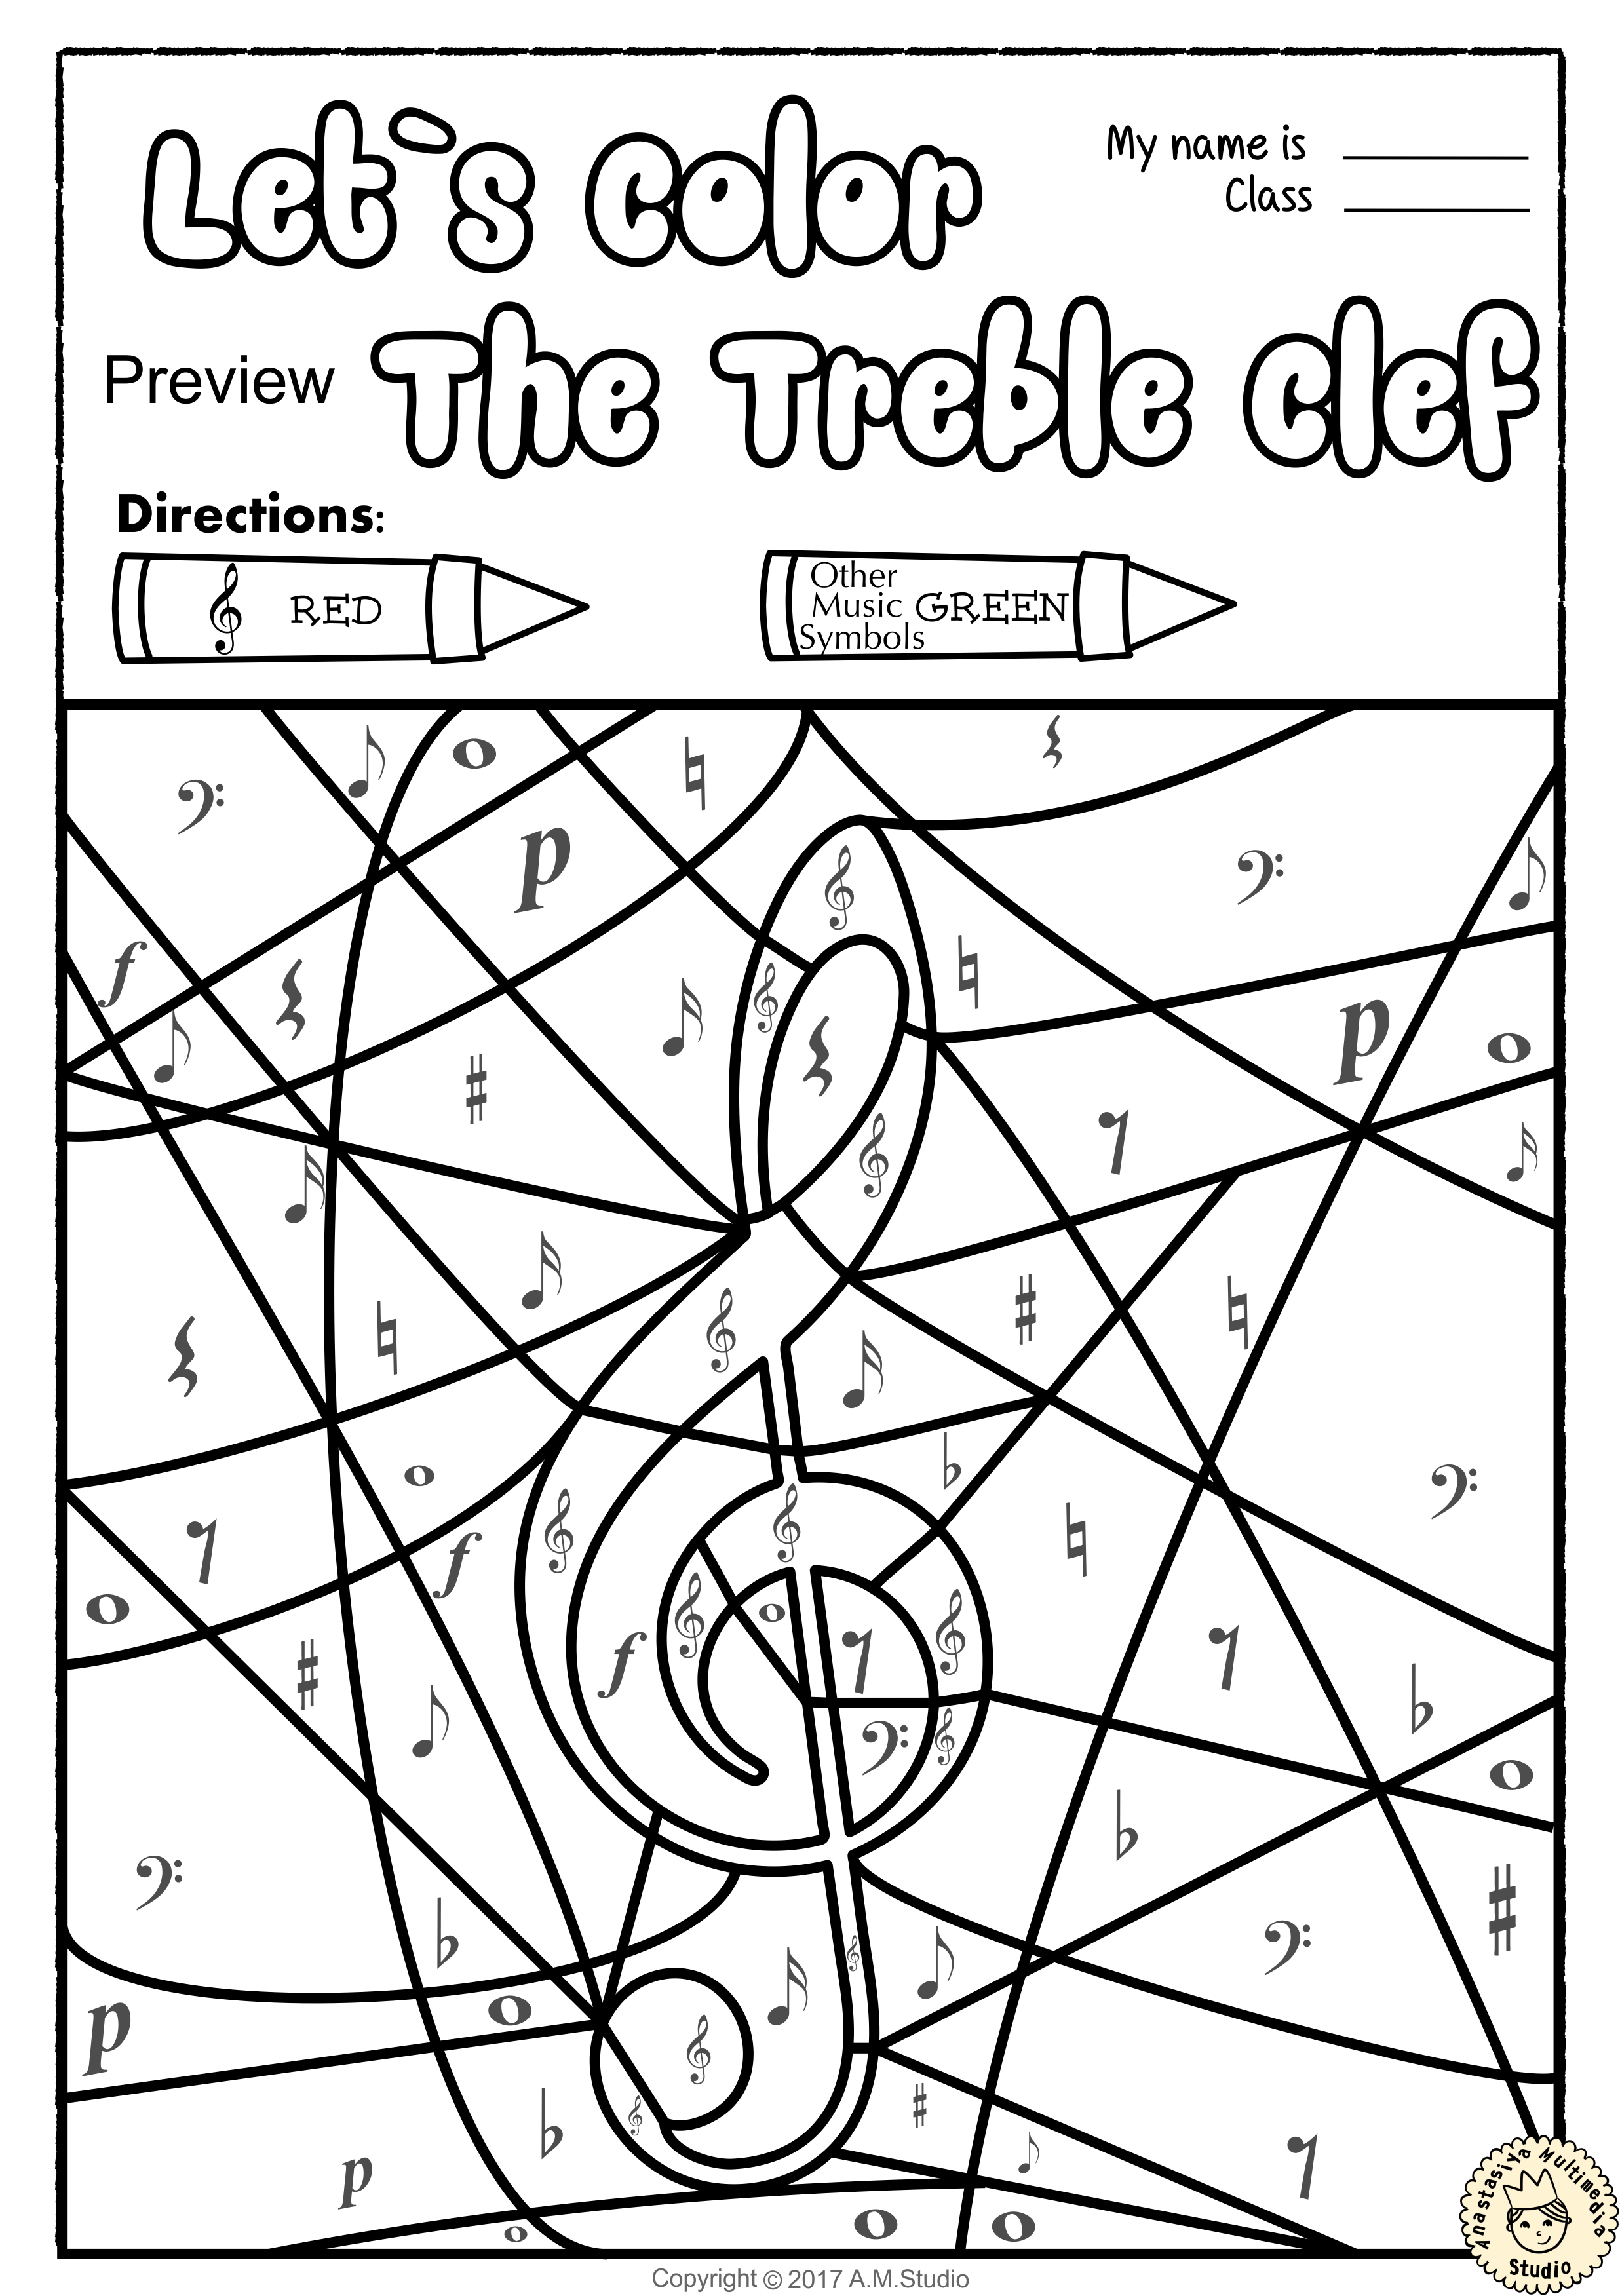 32 Kindergarten Music Coloring Pages Printable 35